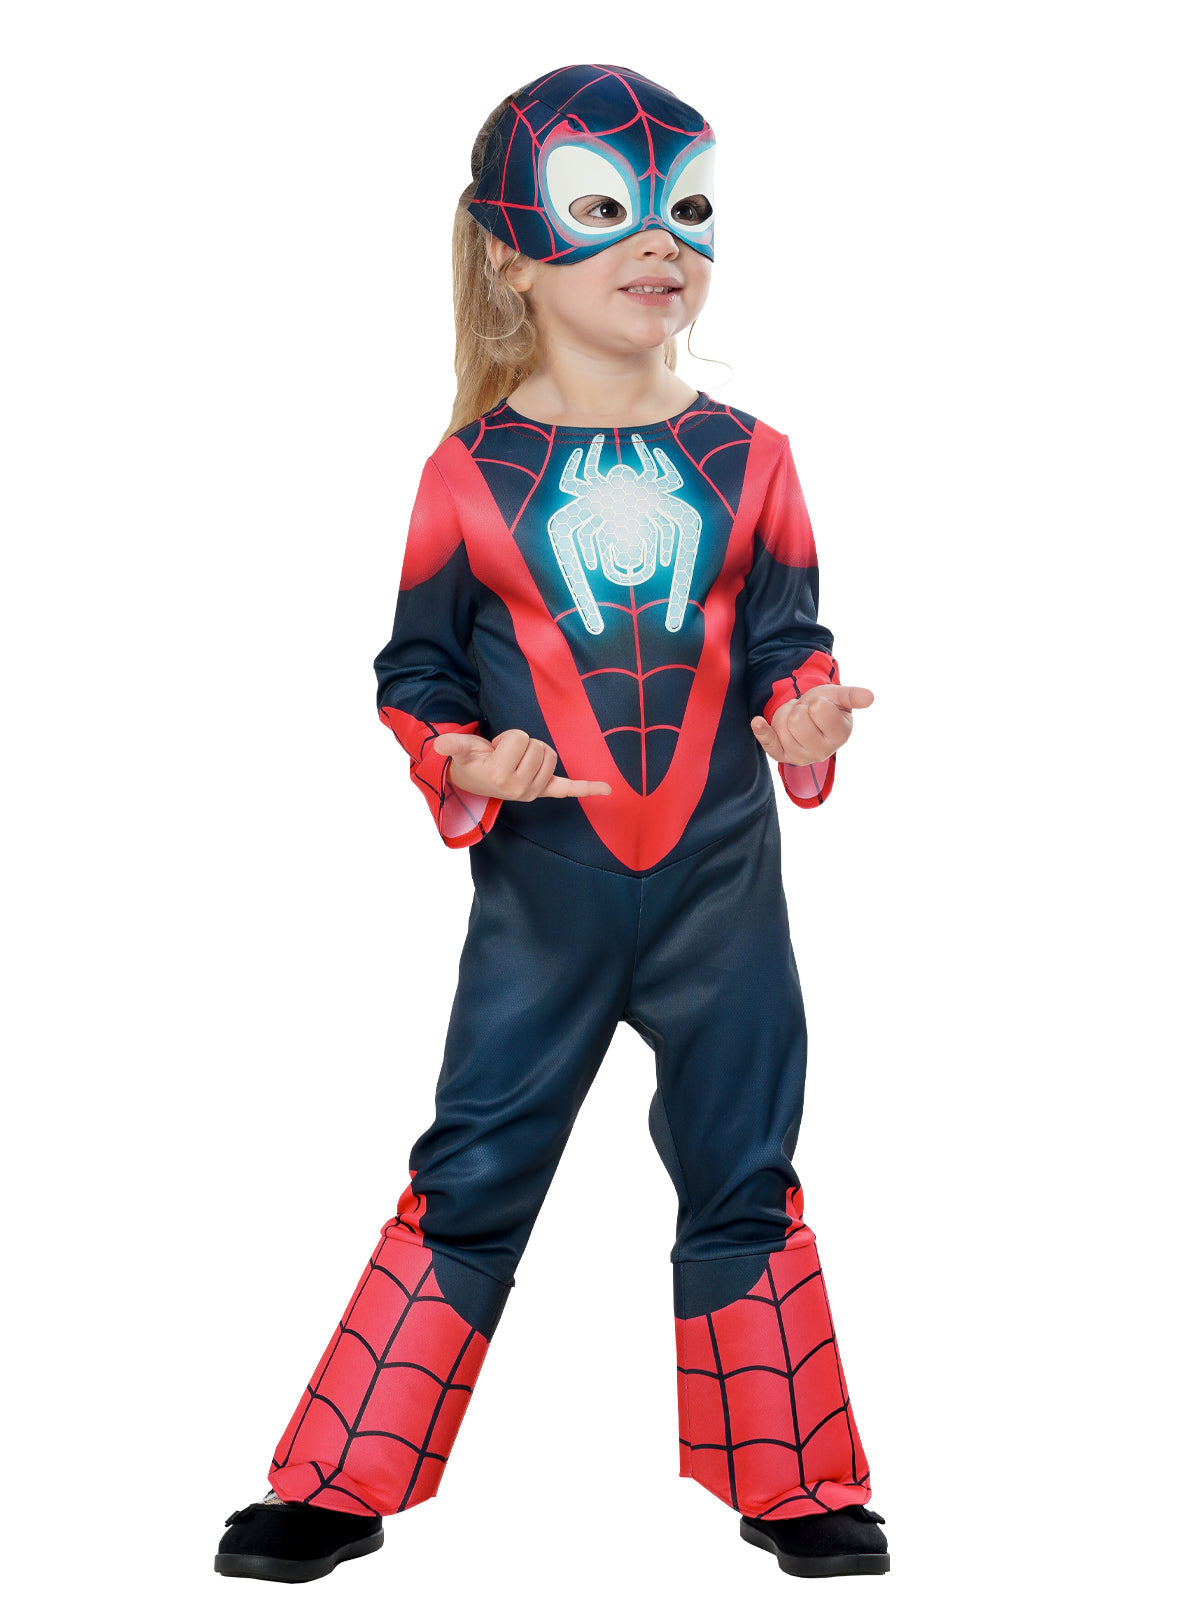 Spiderman Costume Boys kids light up Spider Size T FREE MASK T (2-3)